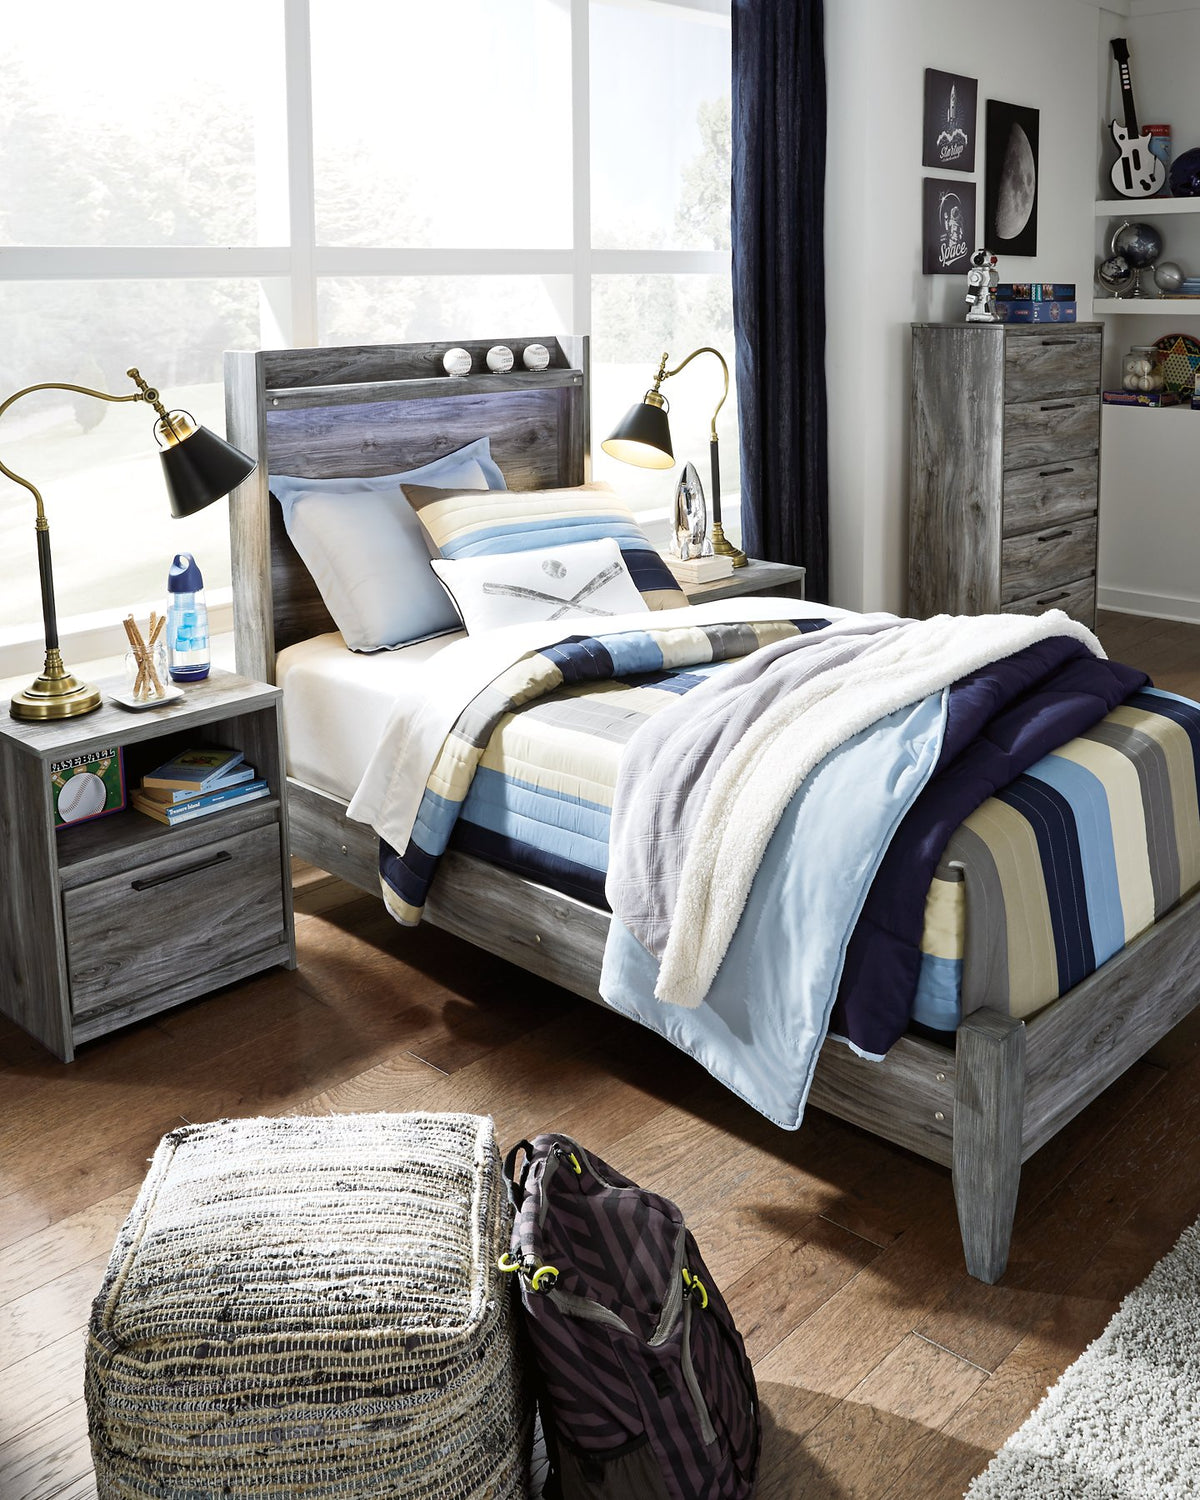 Baystorm Youth Bed Baystorm Youth Bed Half Price Furniture